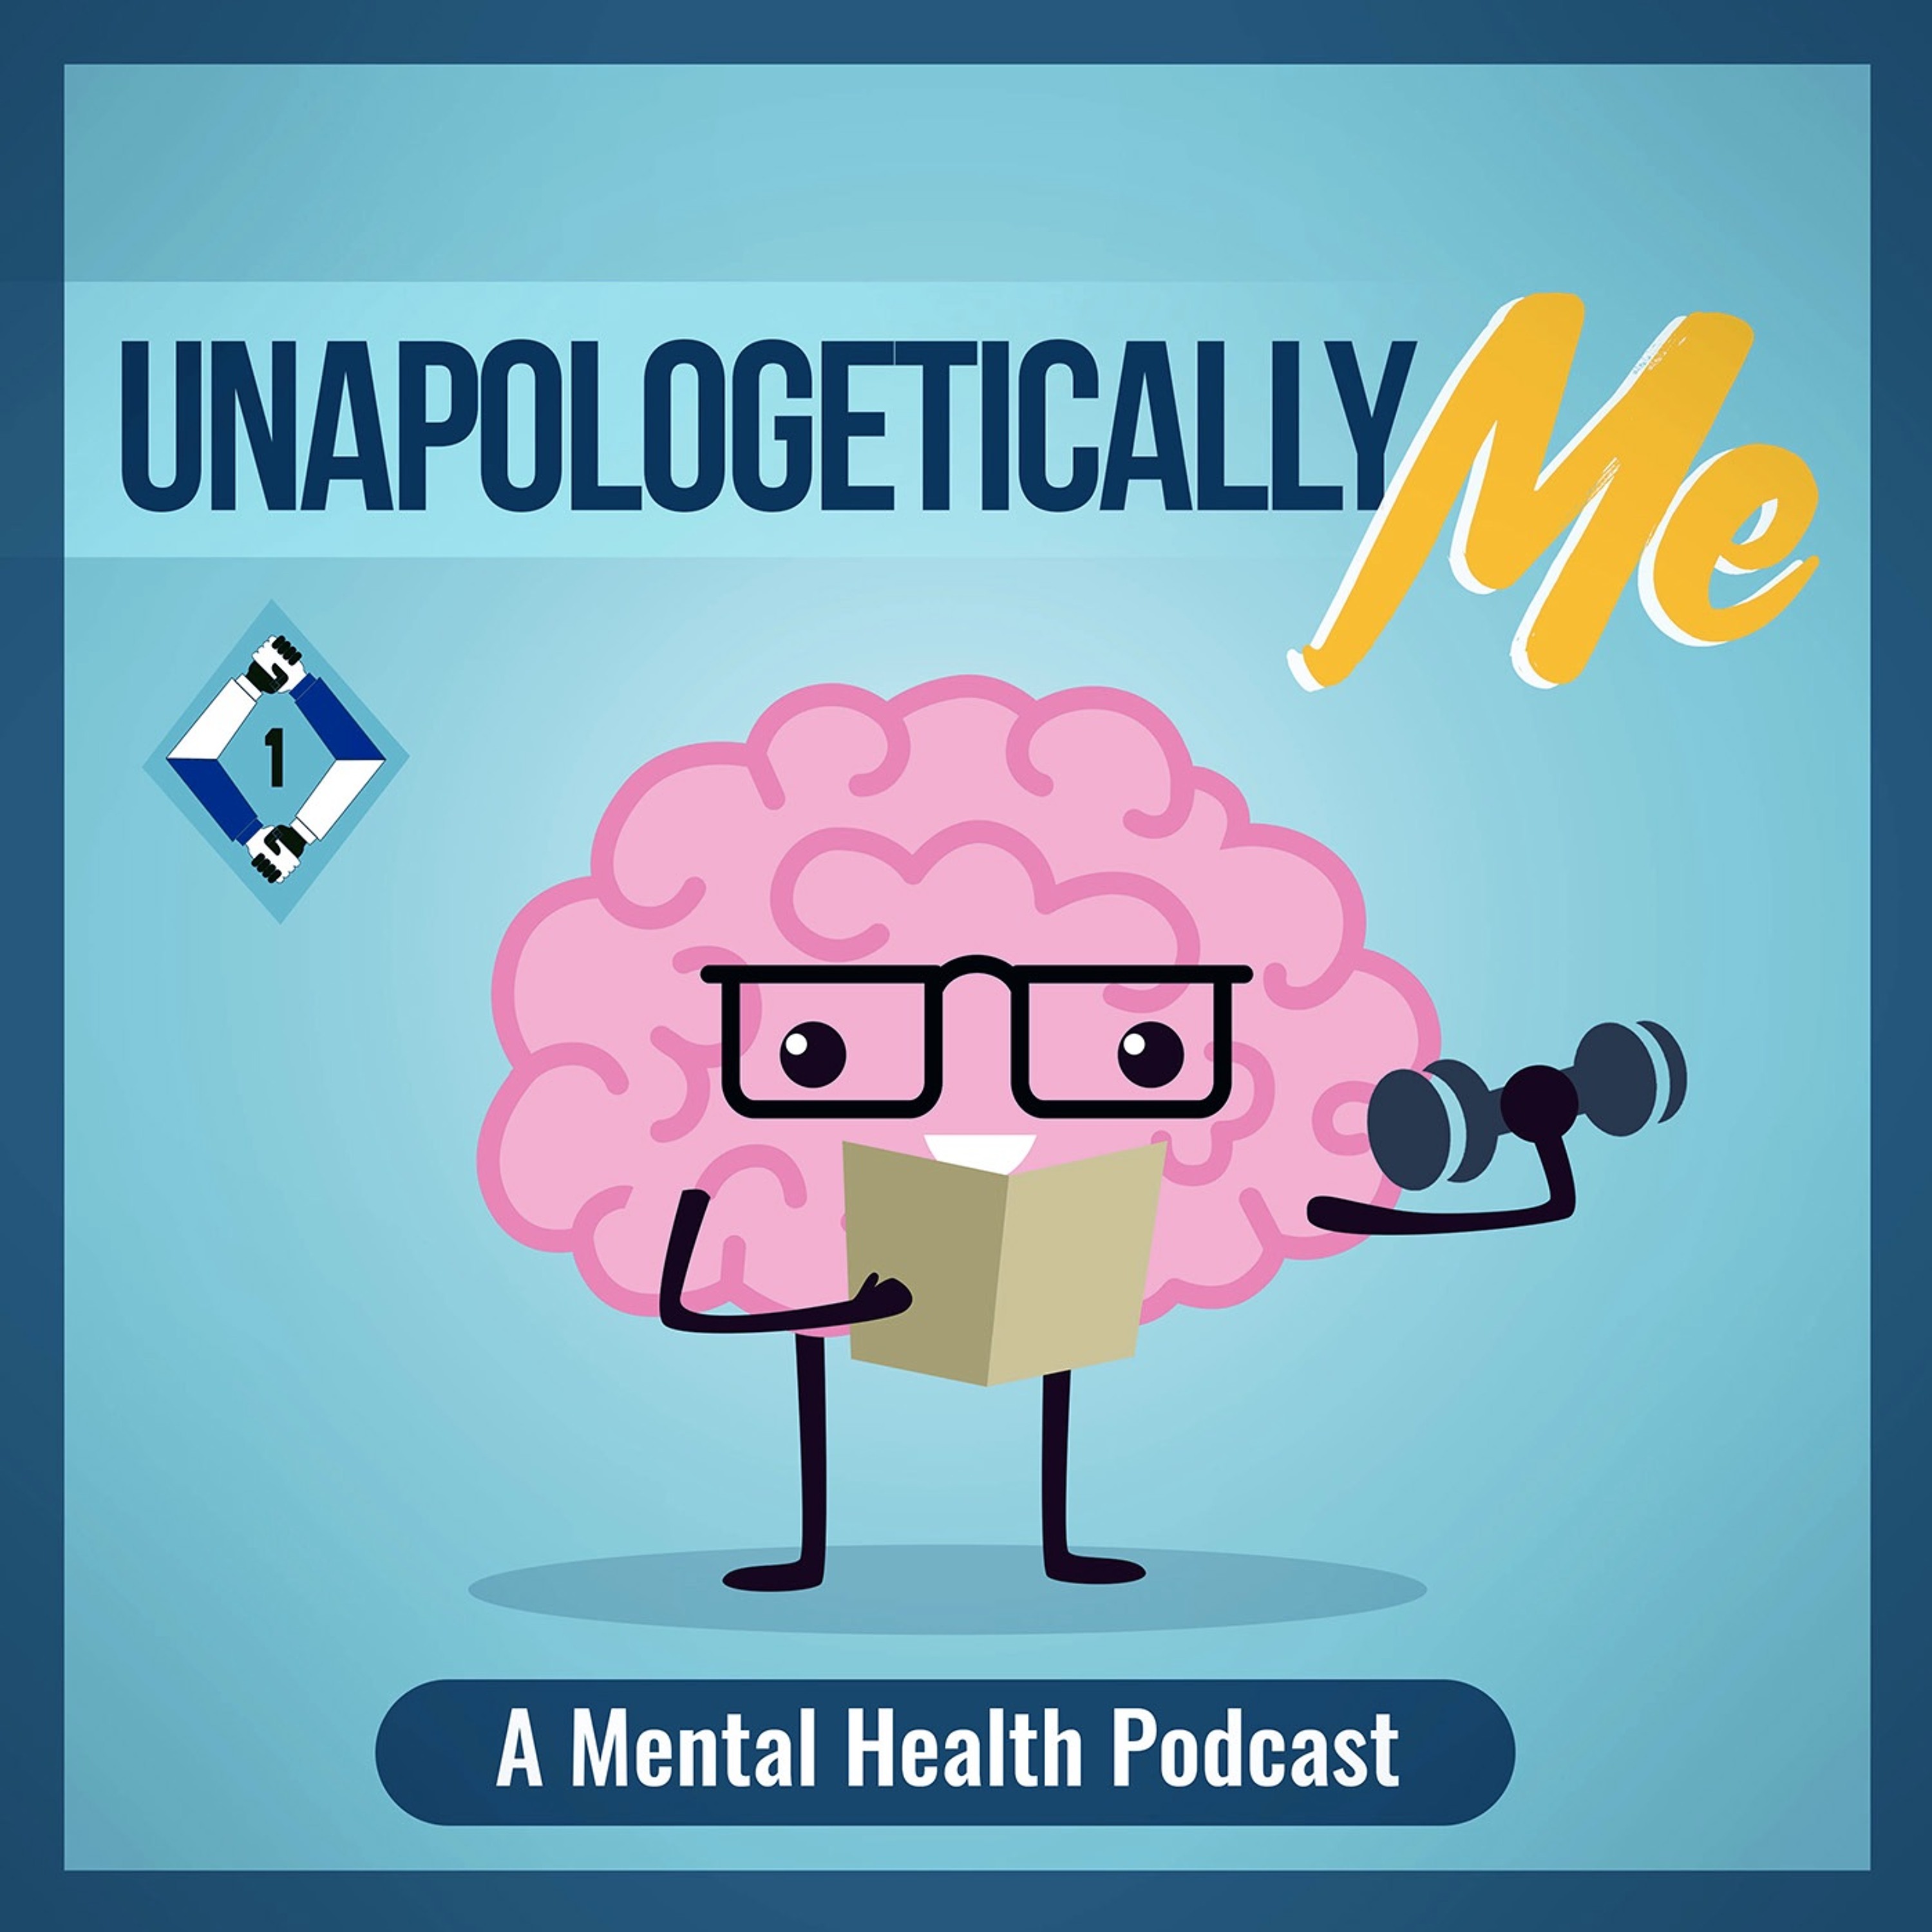 Unapologetically Me: A Mental Health Podcast - Health Tips Compilation #6